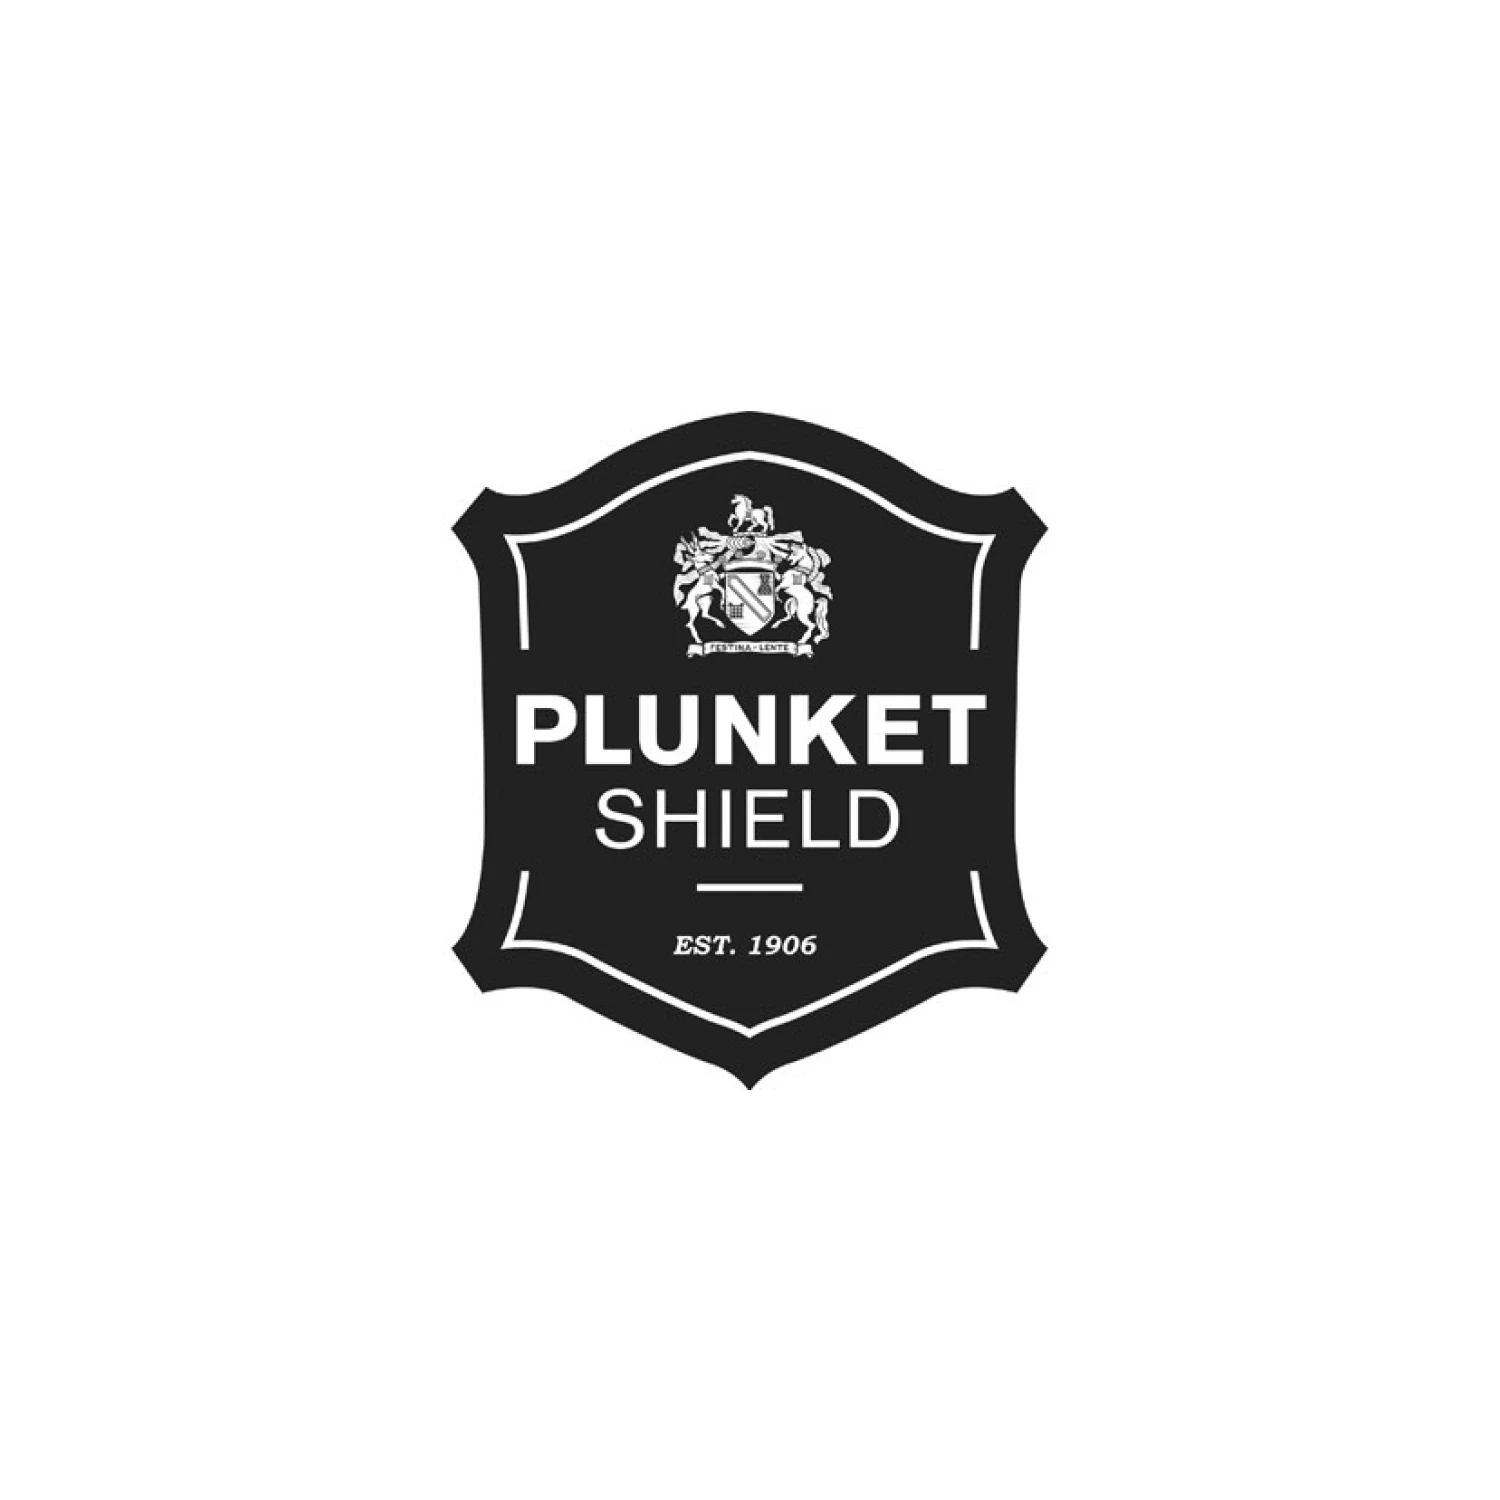 Learn about the teams and the long history of Plunket Shield.